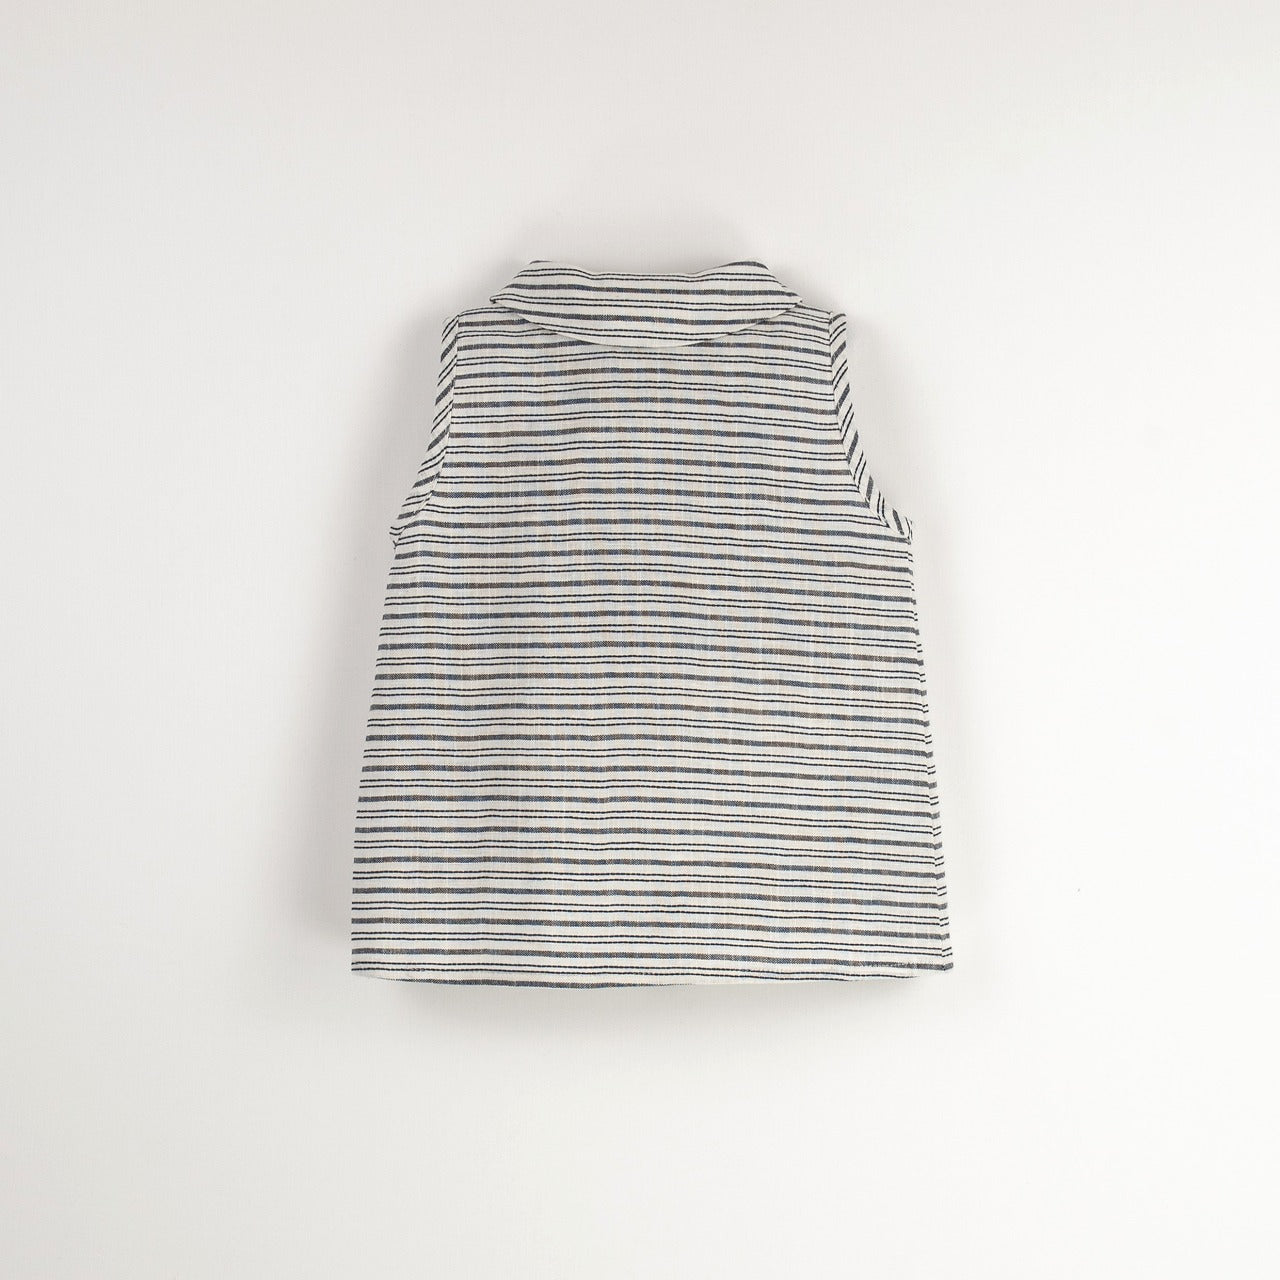 【Popelin】【30%OFF】Embroidered striped sleeveless shirt ノースリーブシャツ 12/18m,18/24m,2/3y,3/4y  | Coucoubebe/ククベベ